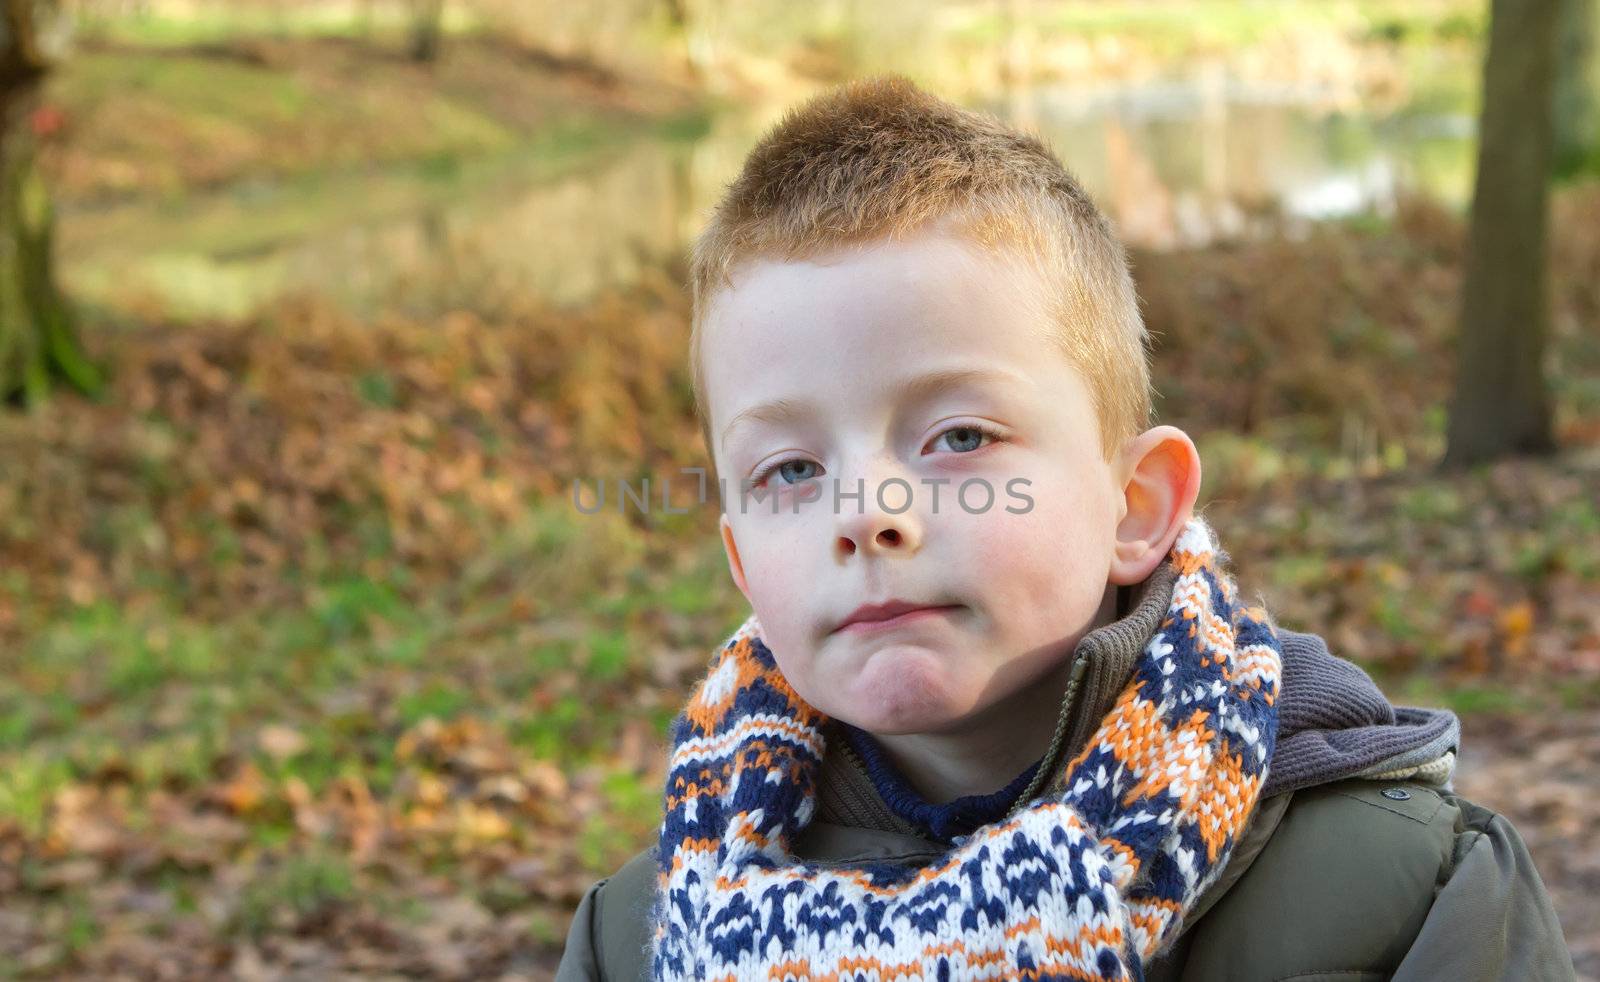 Depressed young boy looking directly ahead